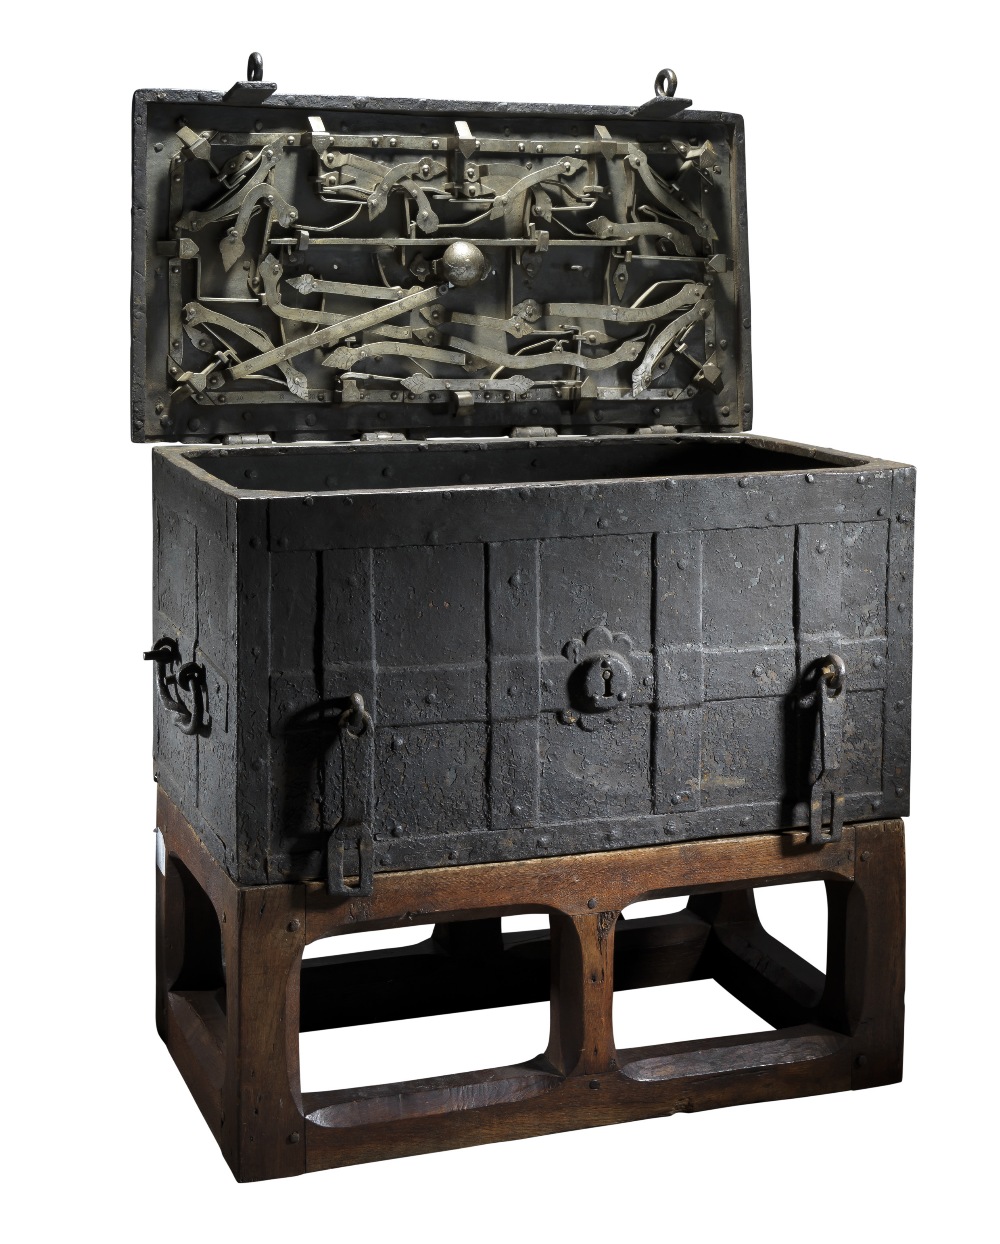 a german iron strong box, late 17TH/18TH century formed of a series of large iron plates overlaid